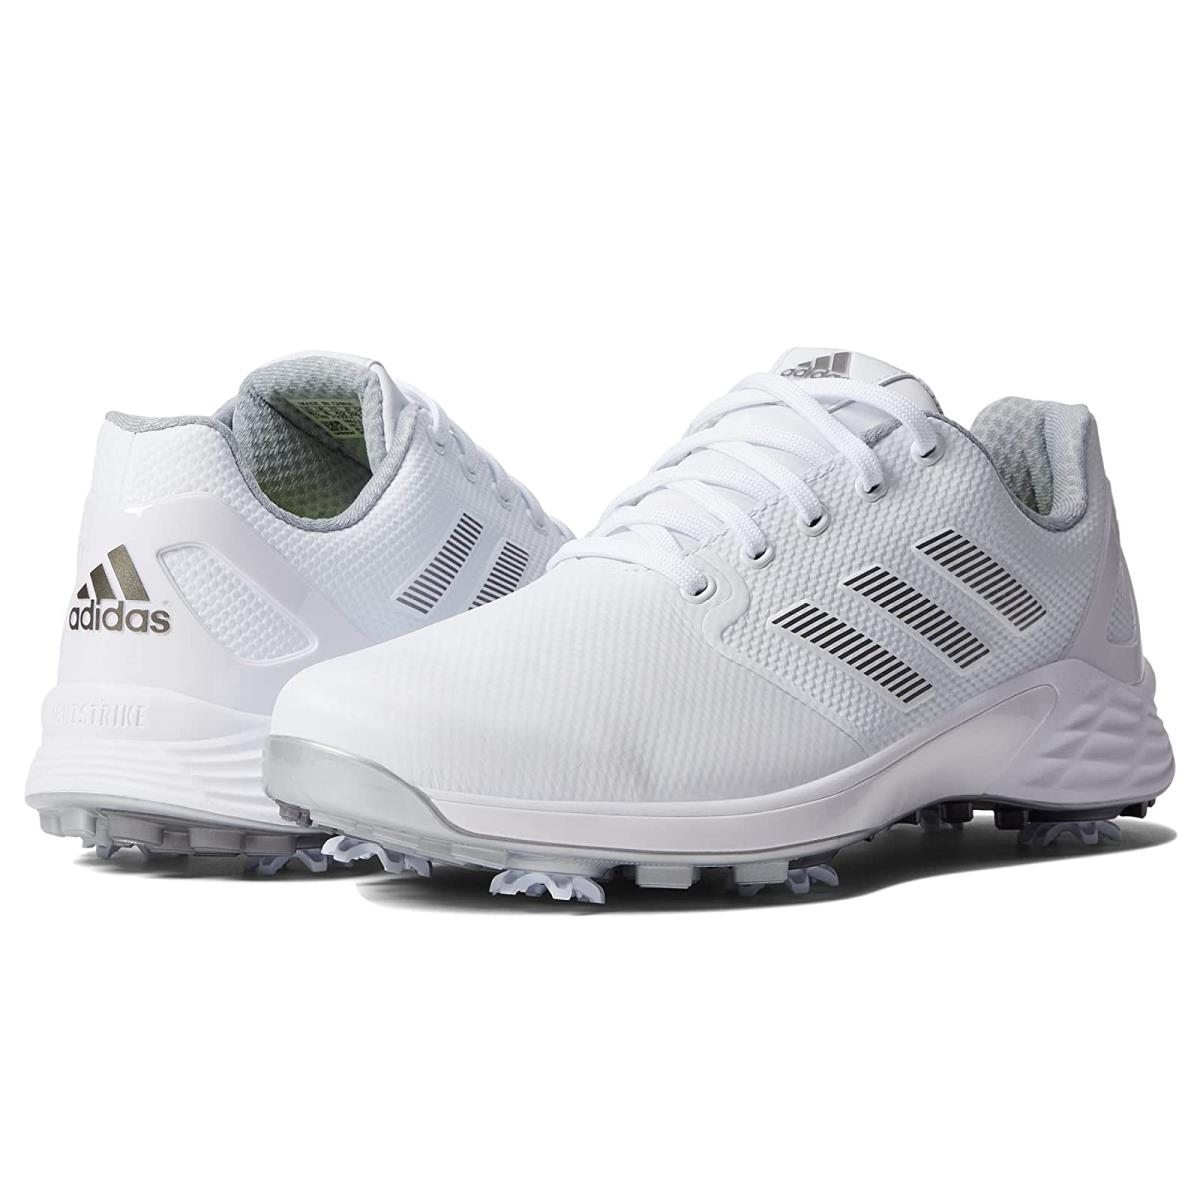 Man`s Sneakers Athletic Shoes Adidas Golf ZG21 Footwear White/Footwear White/Footwear White